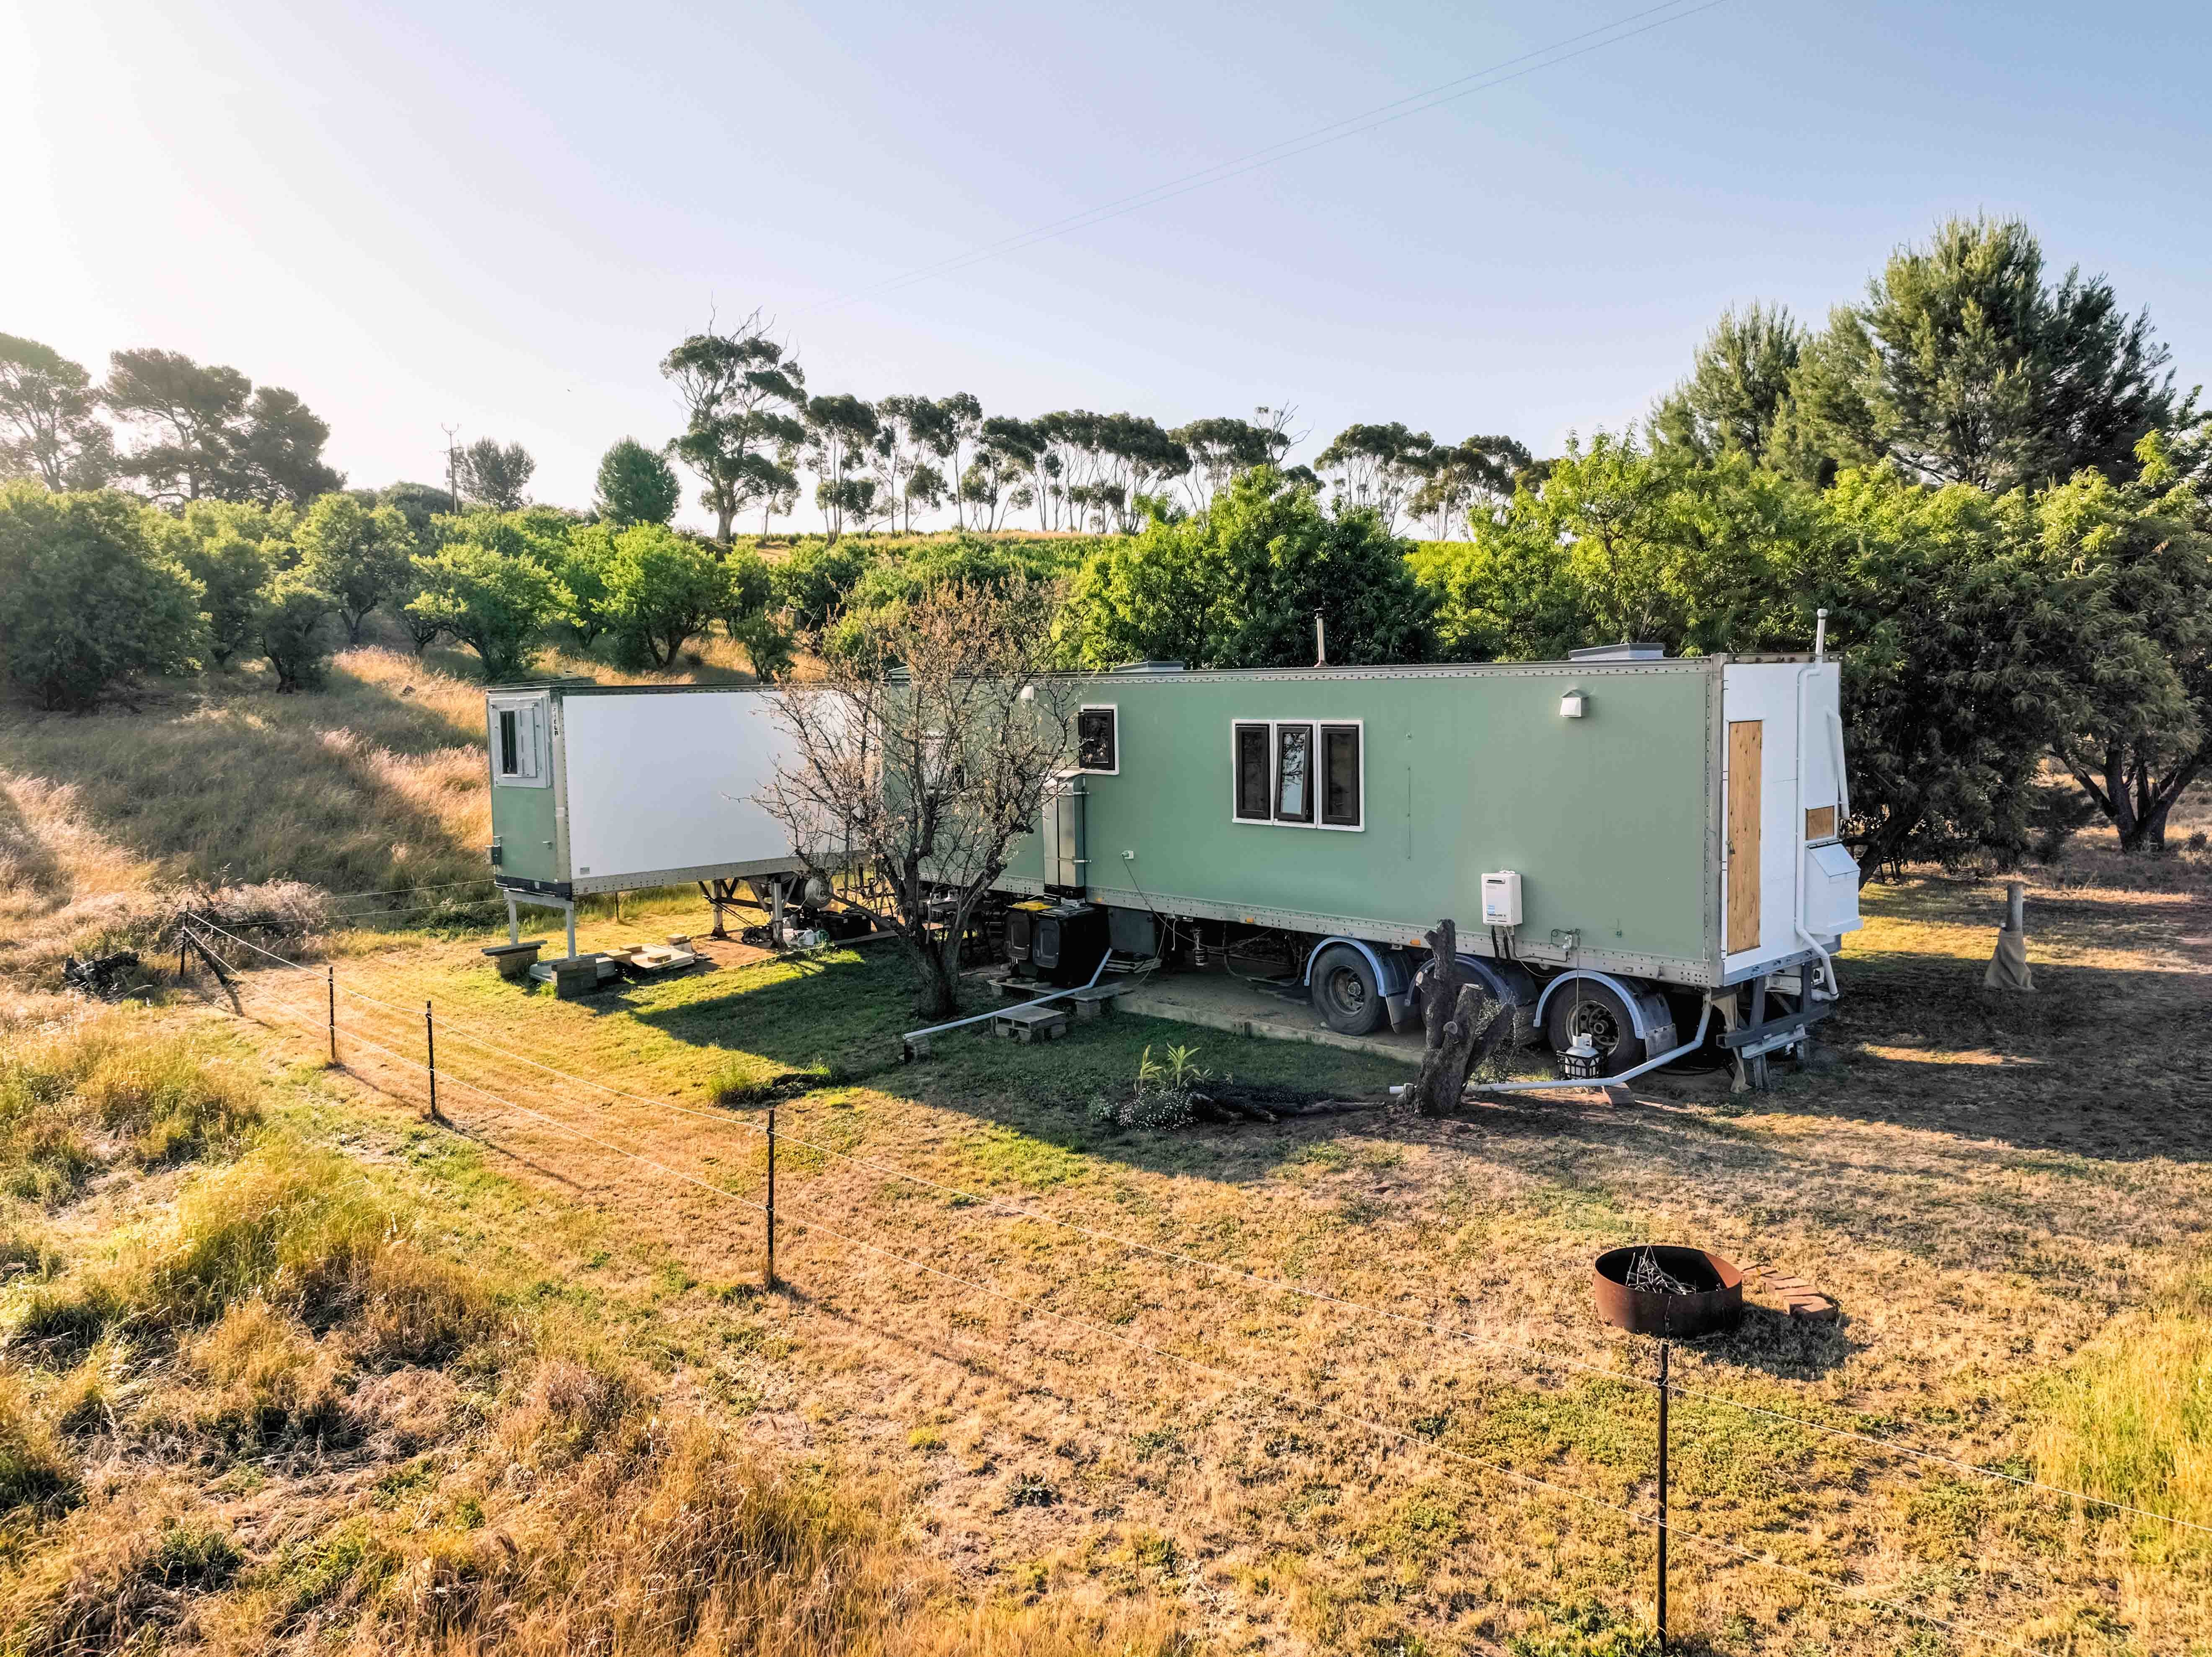 This Luxury Tiny House Was Built Inside A Semi-Trailer!